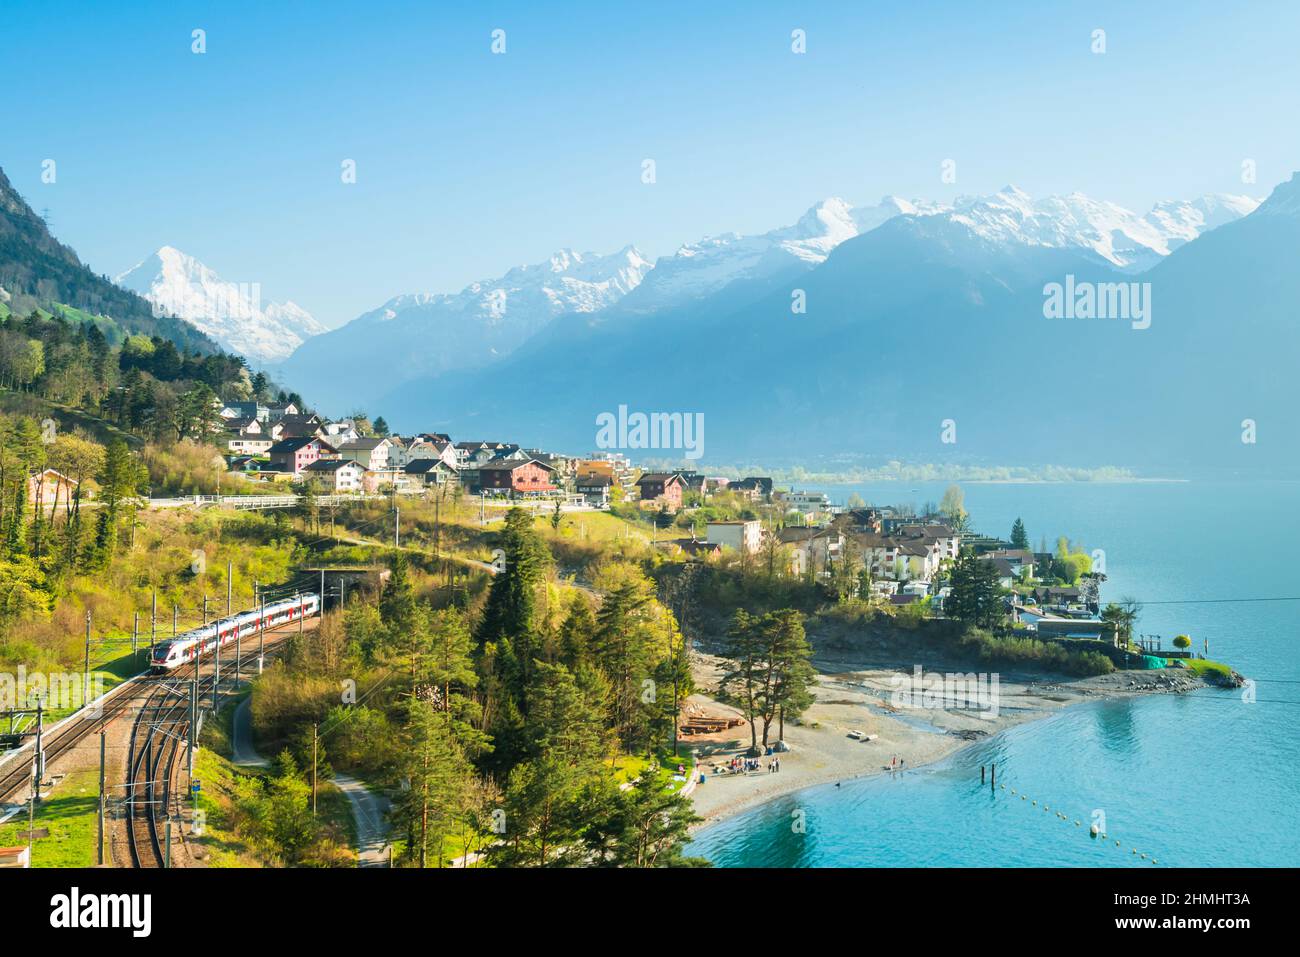 View of the small town in the Alps mountains. Railway along Lake Lucerne. Canton of Uri. Stock Photo